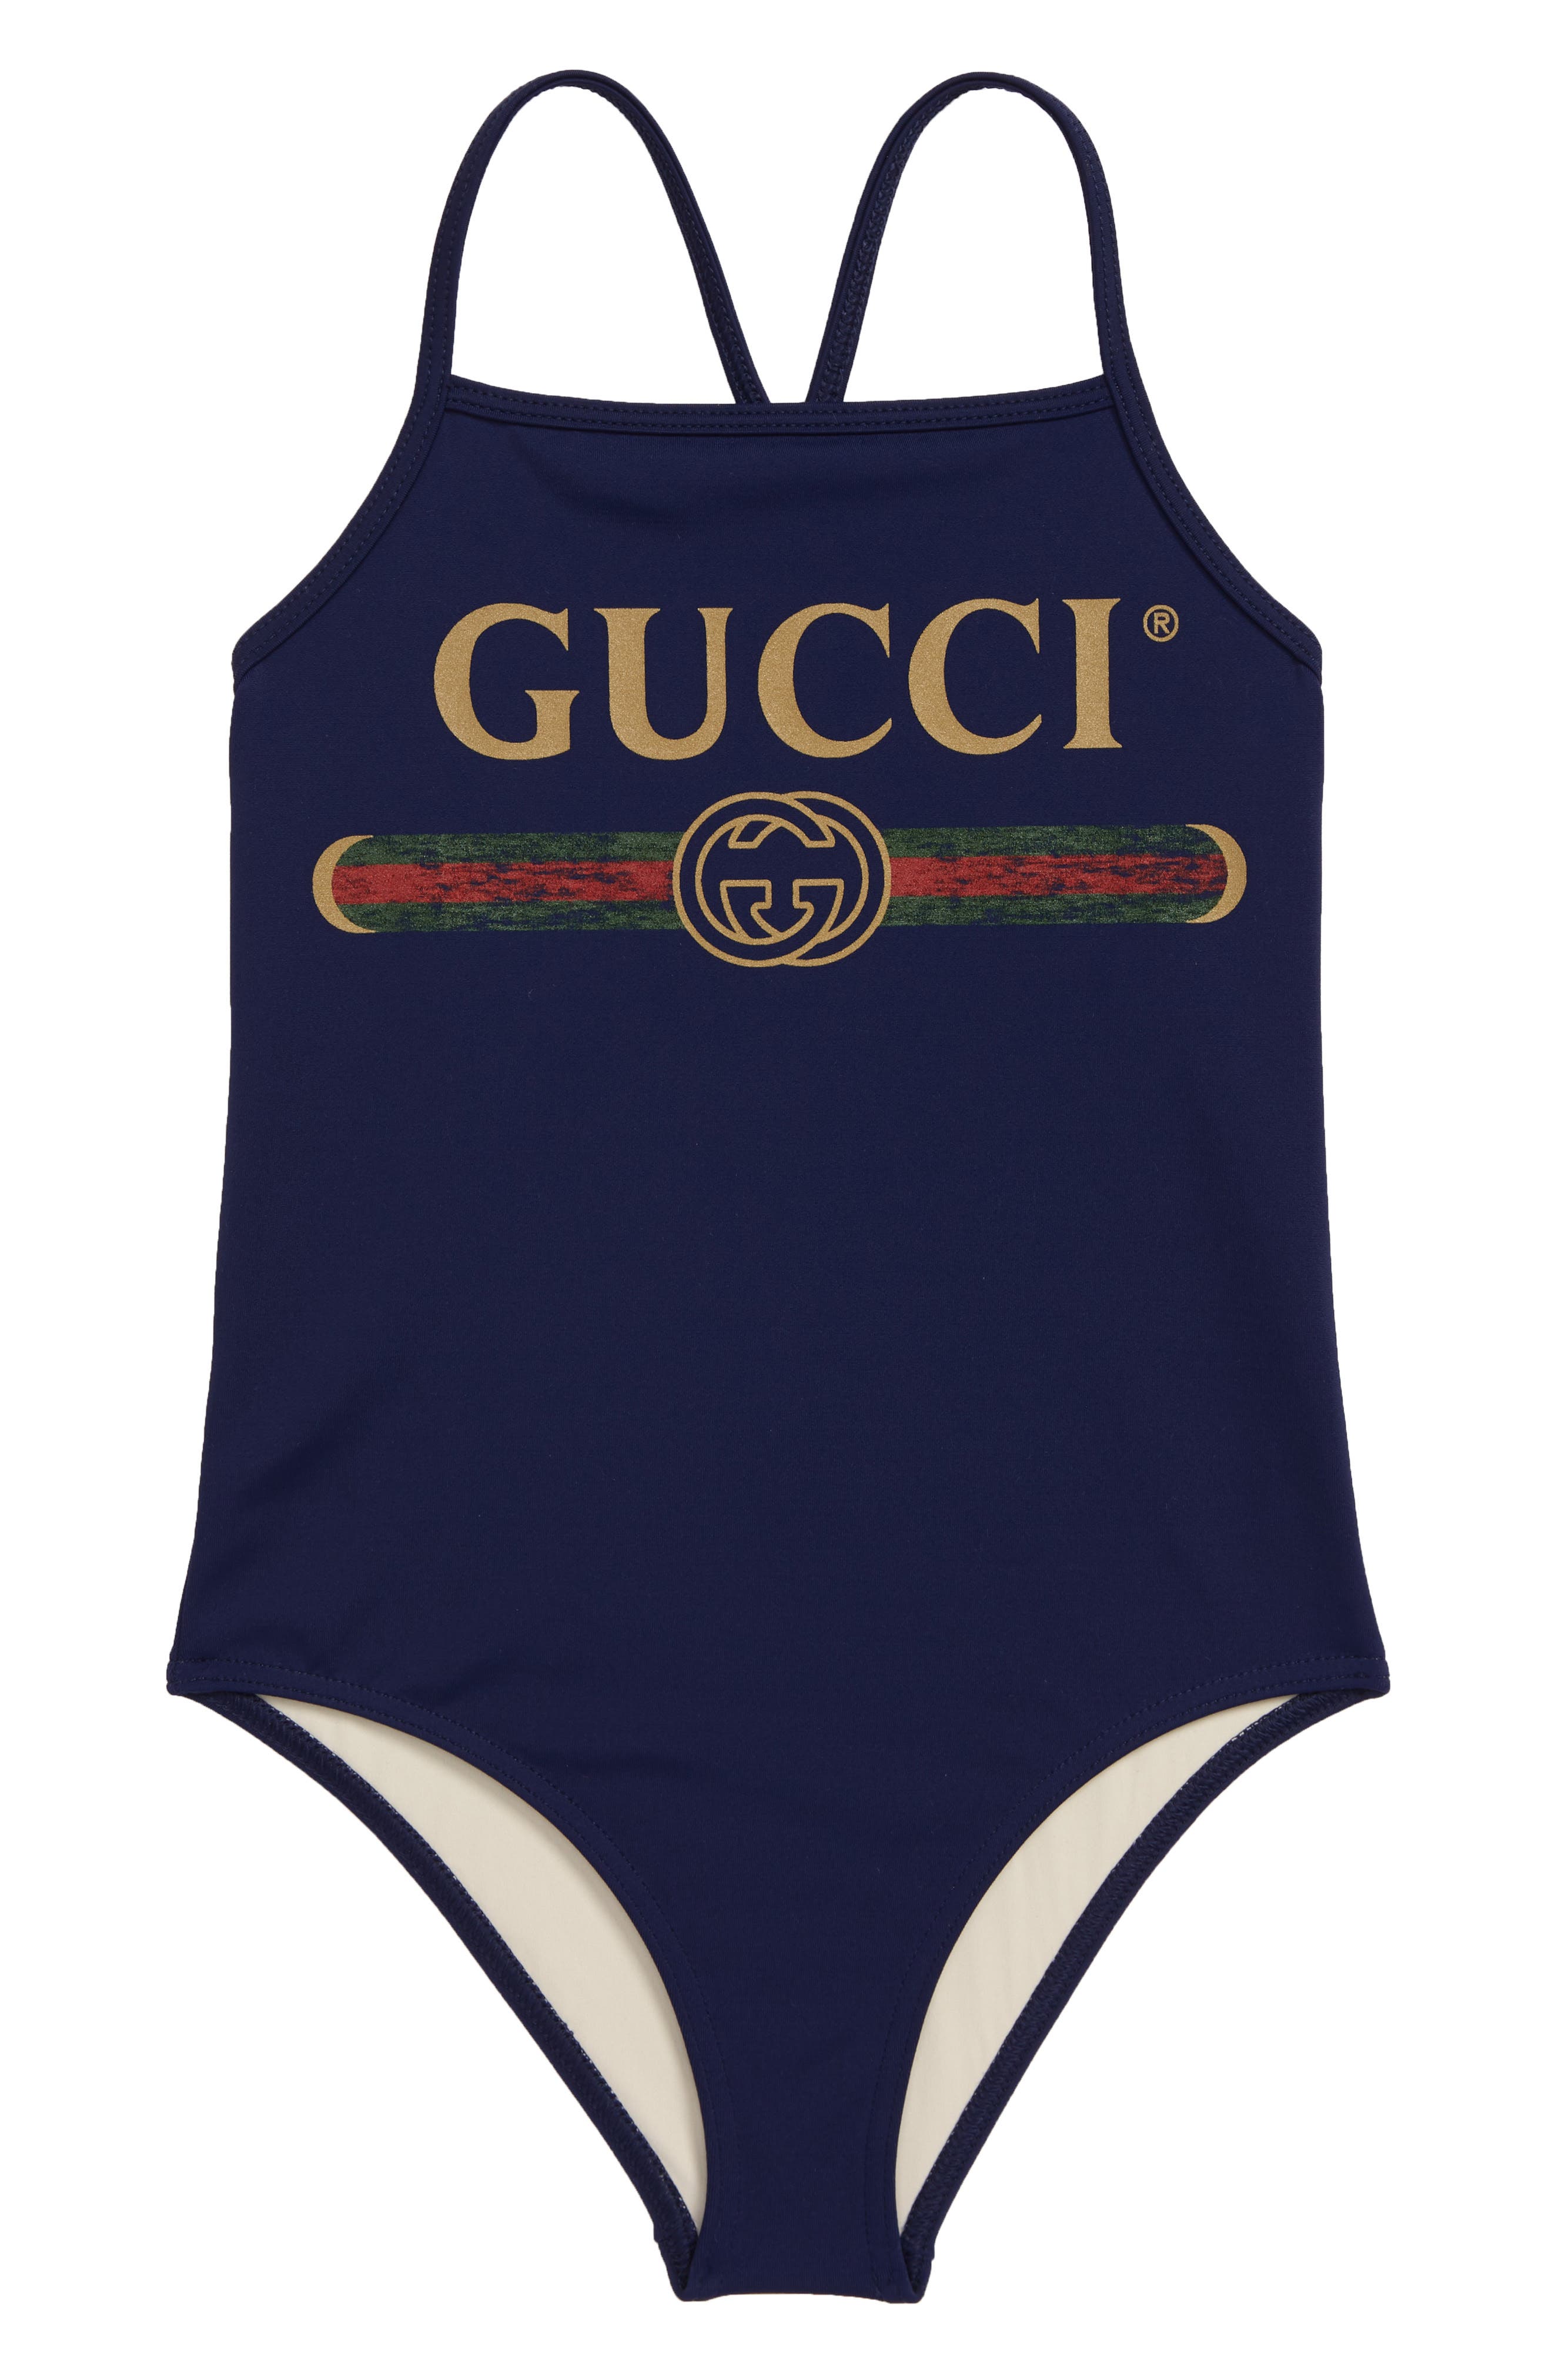 Gucci One-Piece Swimsuit (Little Girls 